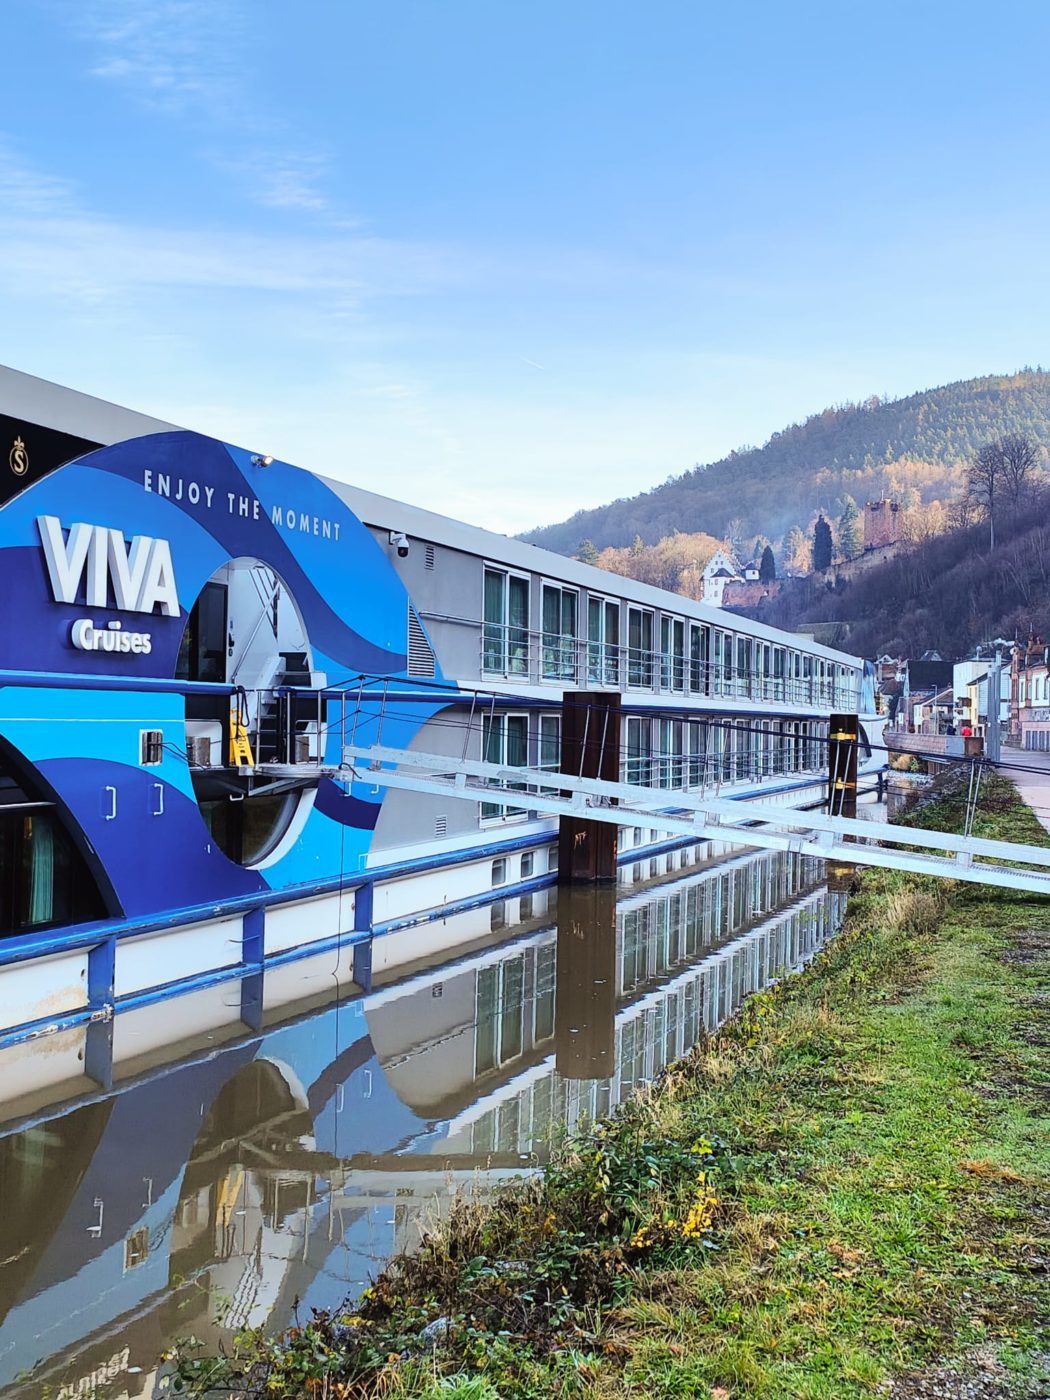 a river cruise on the Main with the VIVA TIARA from VIVA Cruises, with stops in Würzburg, Wertheim, Miltenberg and Frankfurt.